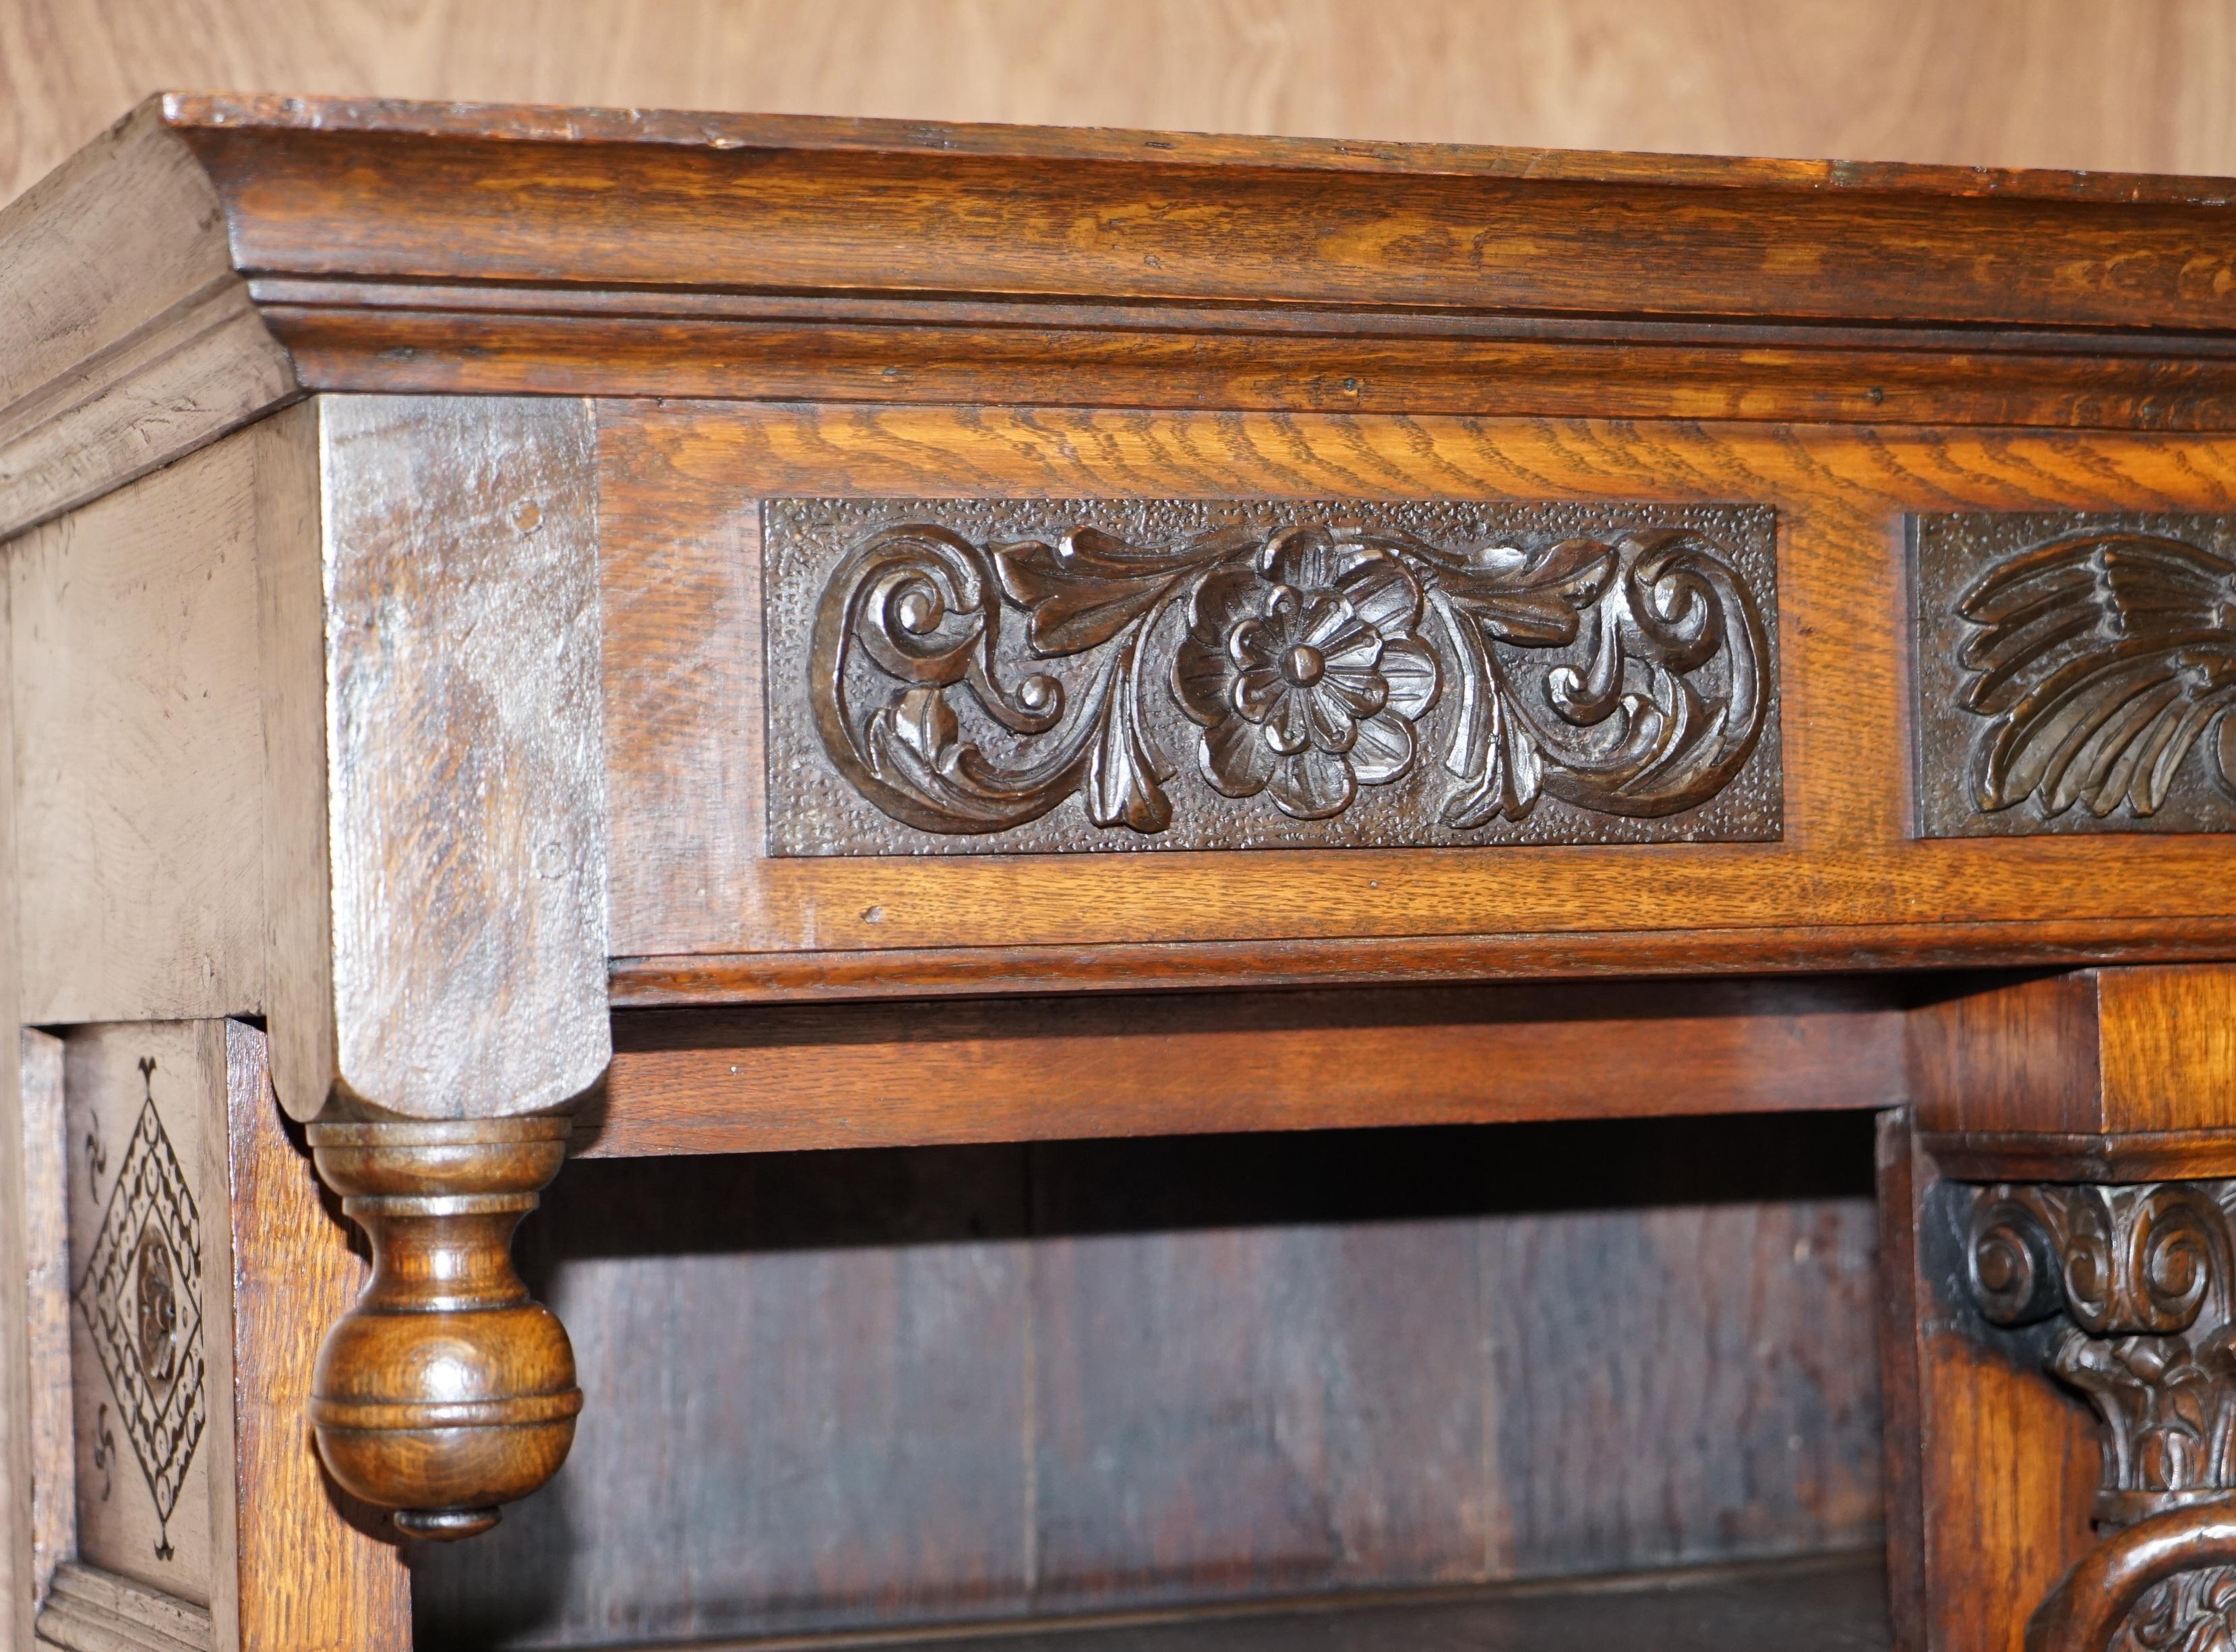 Hand-Crafted Large Heavily Carved Bookcase Cupboard with Ornate Cherub Putti & Lion Figures For Sale